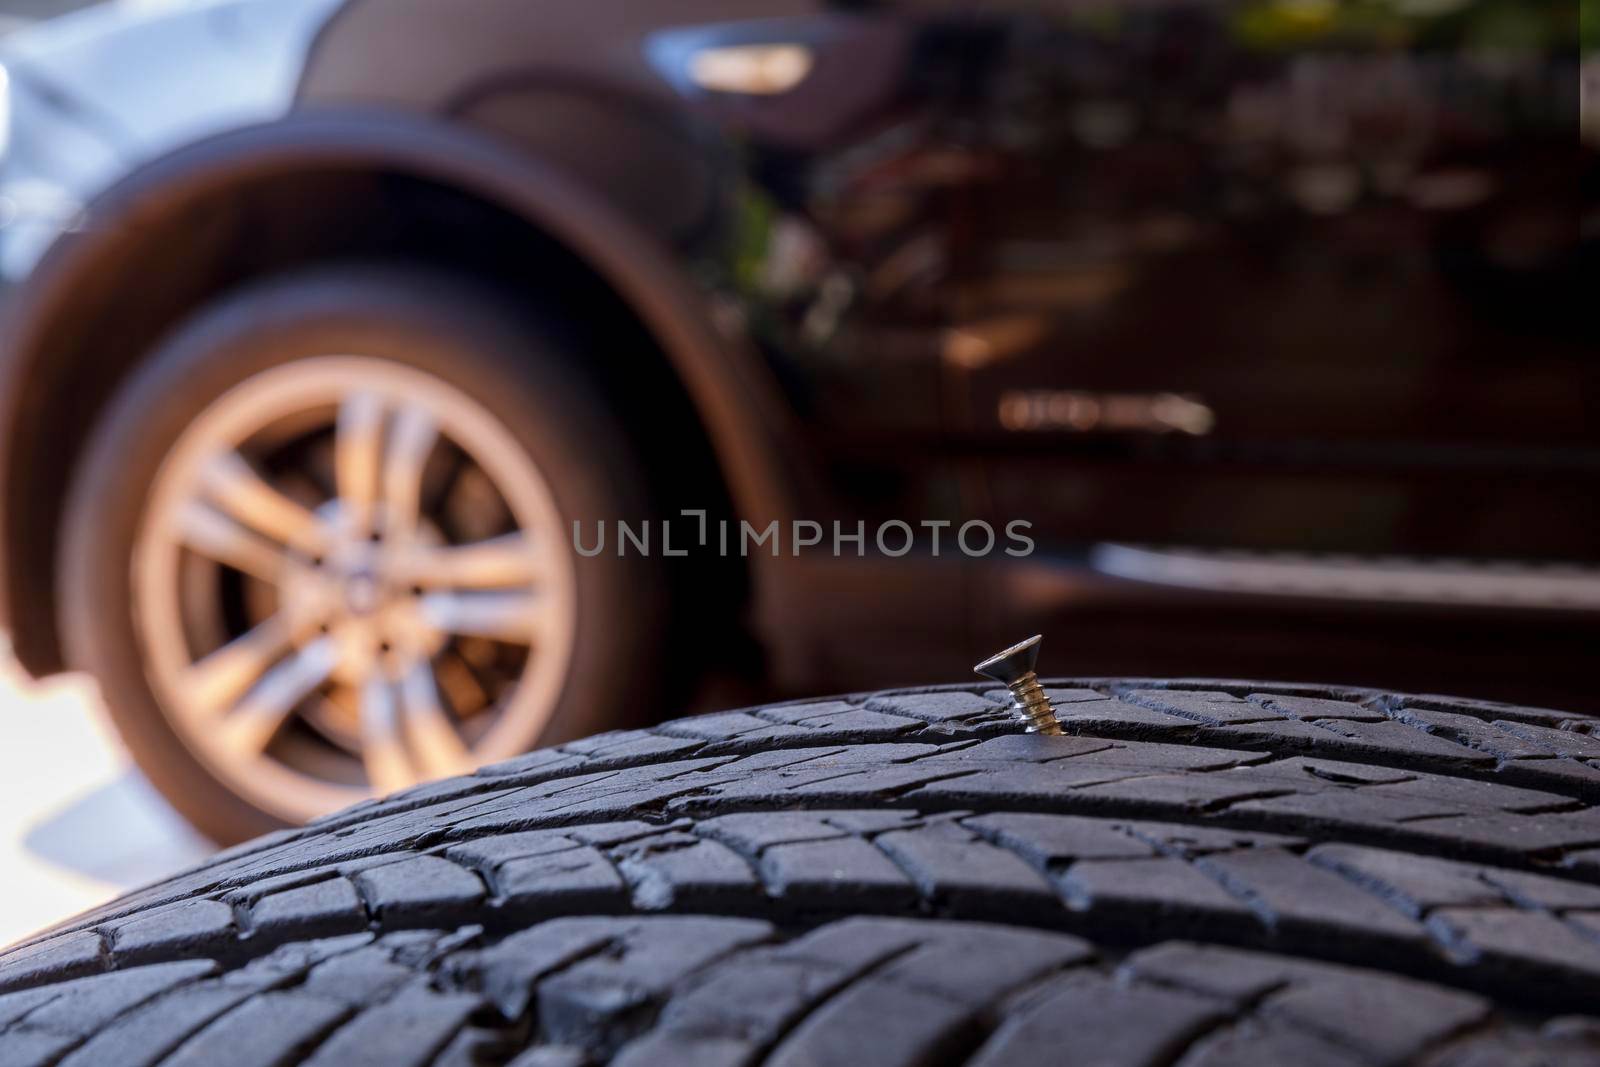 Close up old tire have nails nut or screw drive stuck in side. Tire workshop and change old wheel on the car. Used car tires stacked in piles at tire fitting service repair shop by Satrinekarn